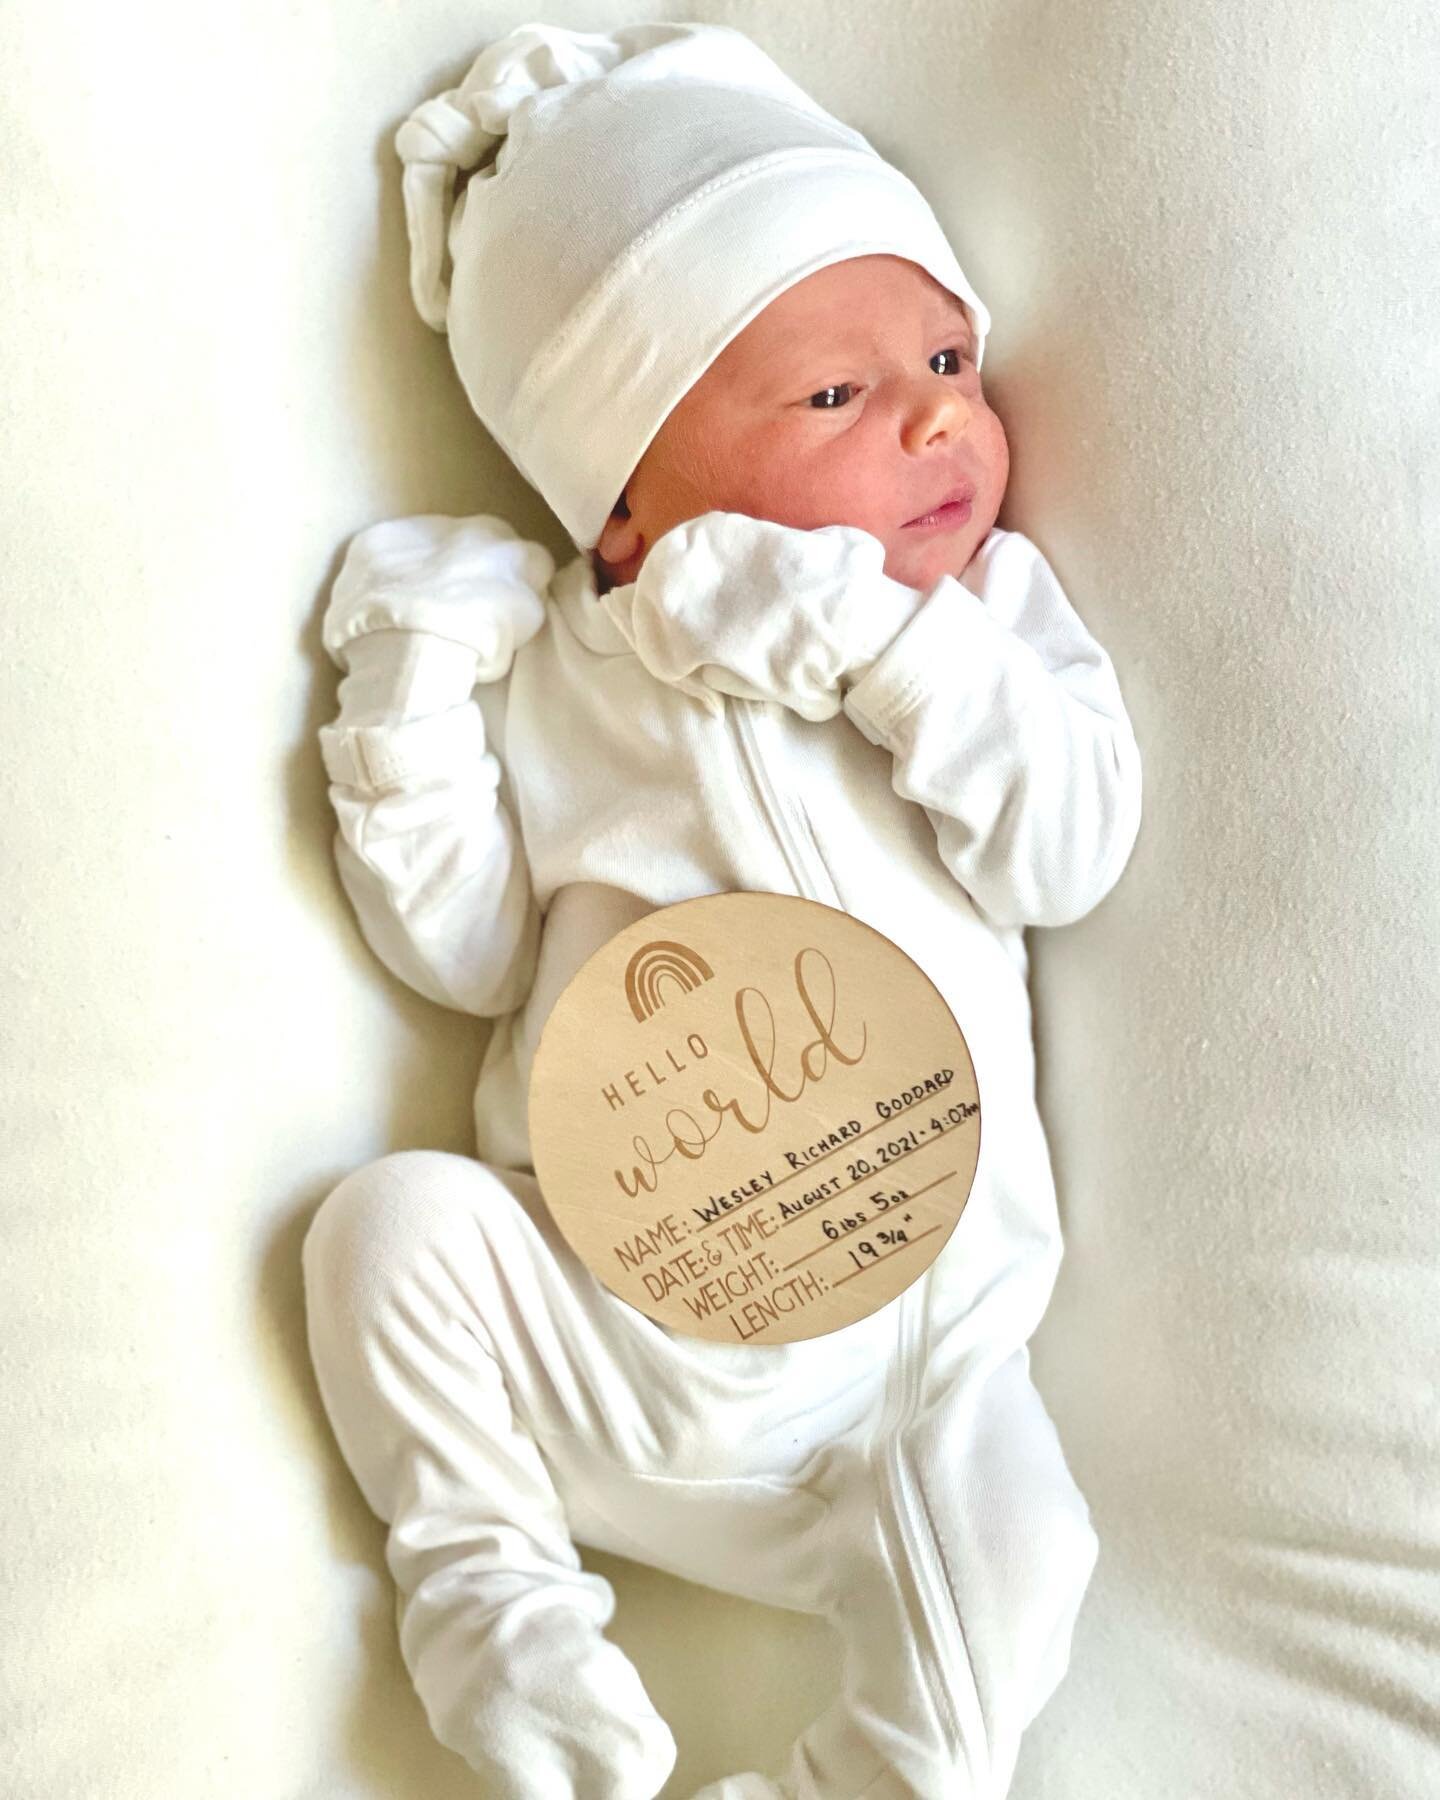 Introducing&hellip;

Wesley Richard Goddard
Born on August 20, 2021 at 4:07pm, weighing 6lbs 5oz. 

Wesley, you sure do know how to make an entrance! I am so happy that you were so excited to meet your Mom and I that you decided to come almost 4 week